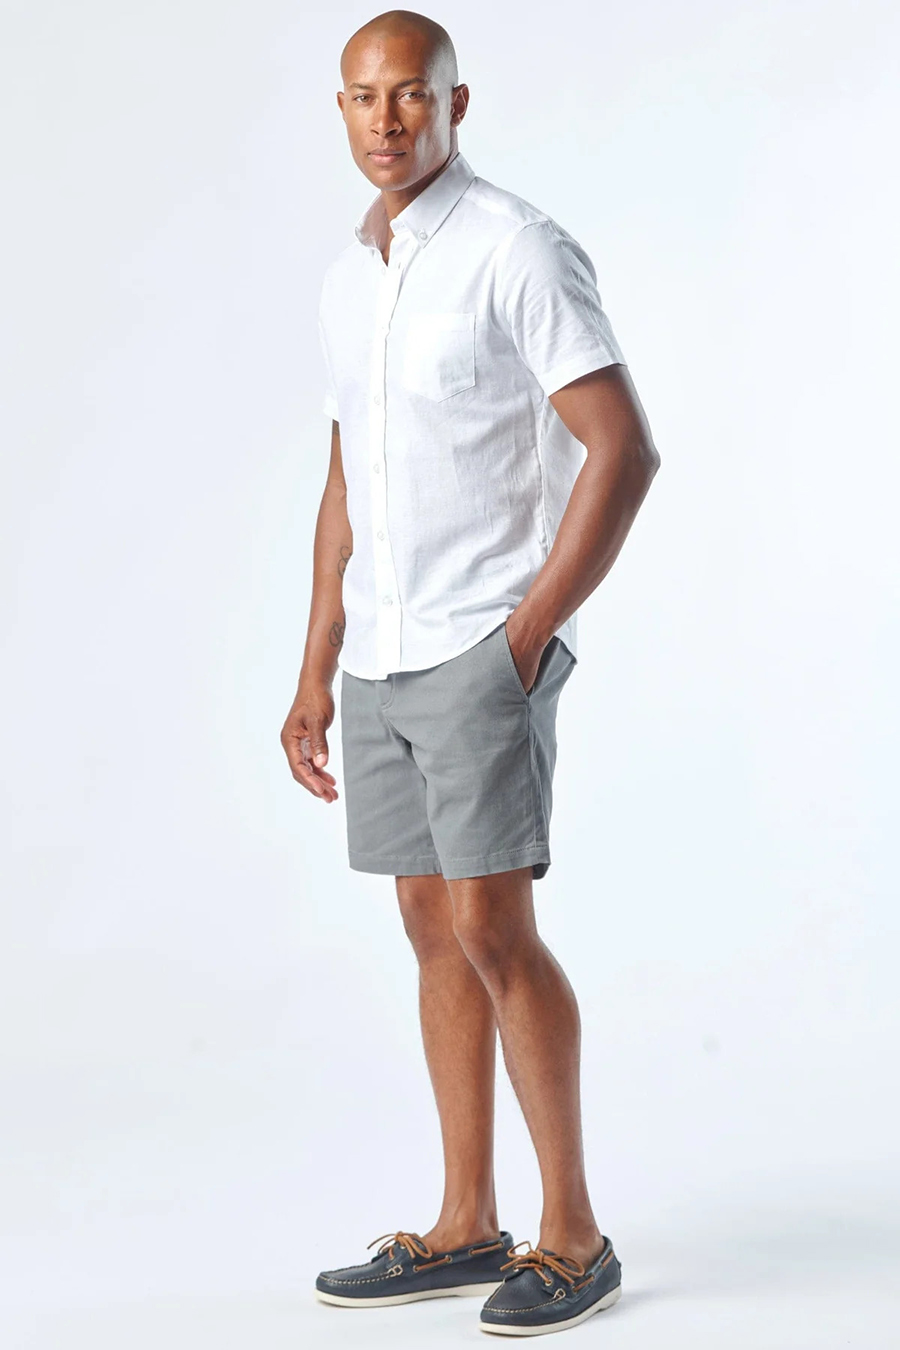 Wear a white button-down shirt, gray chinos, and navy boat shoes